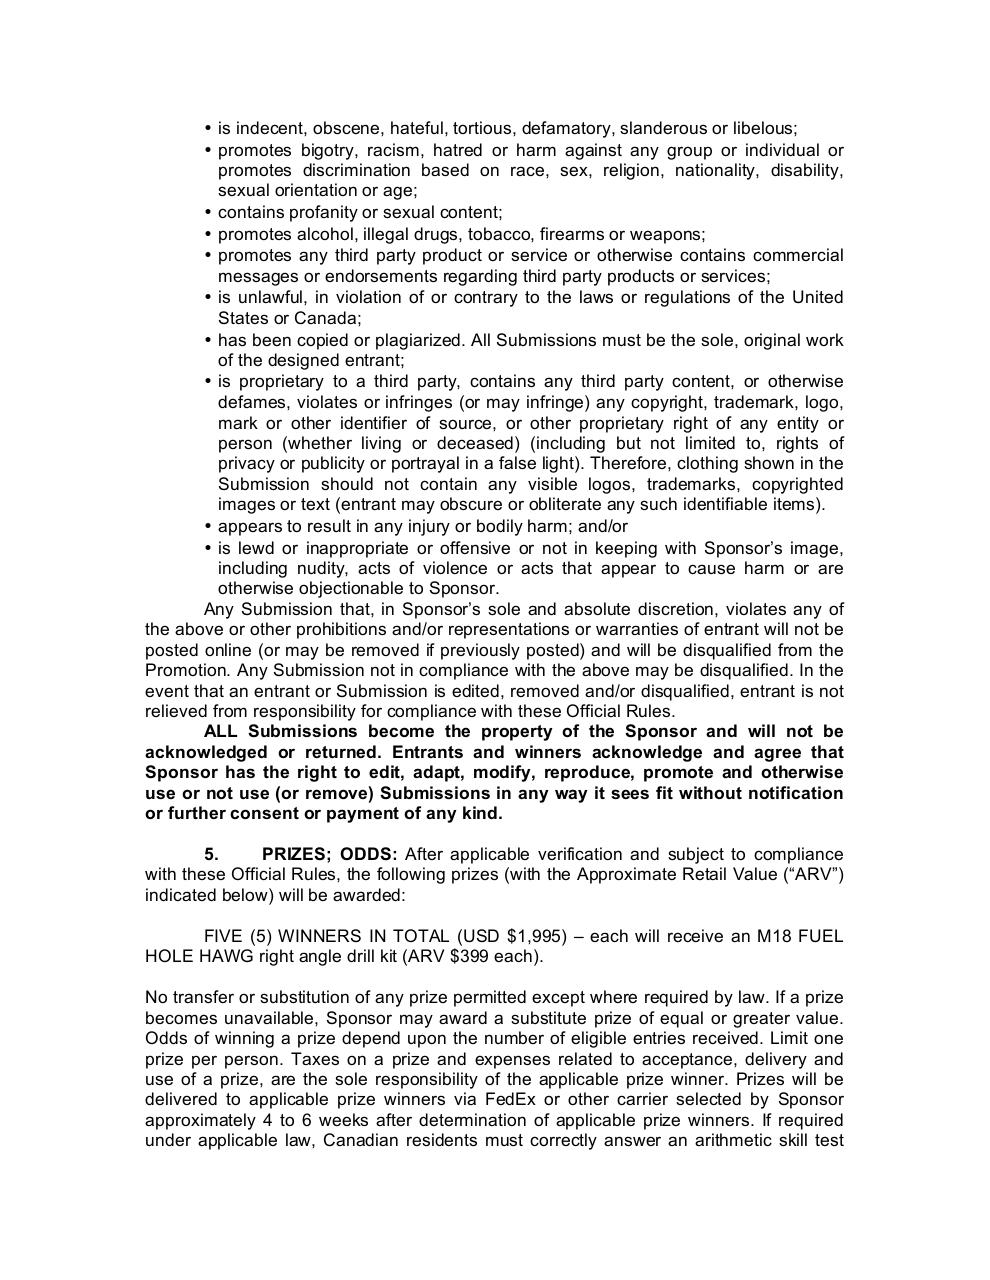 M18 FUEL Hole Hawg Terms and Conditions.pdf - page 3/8